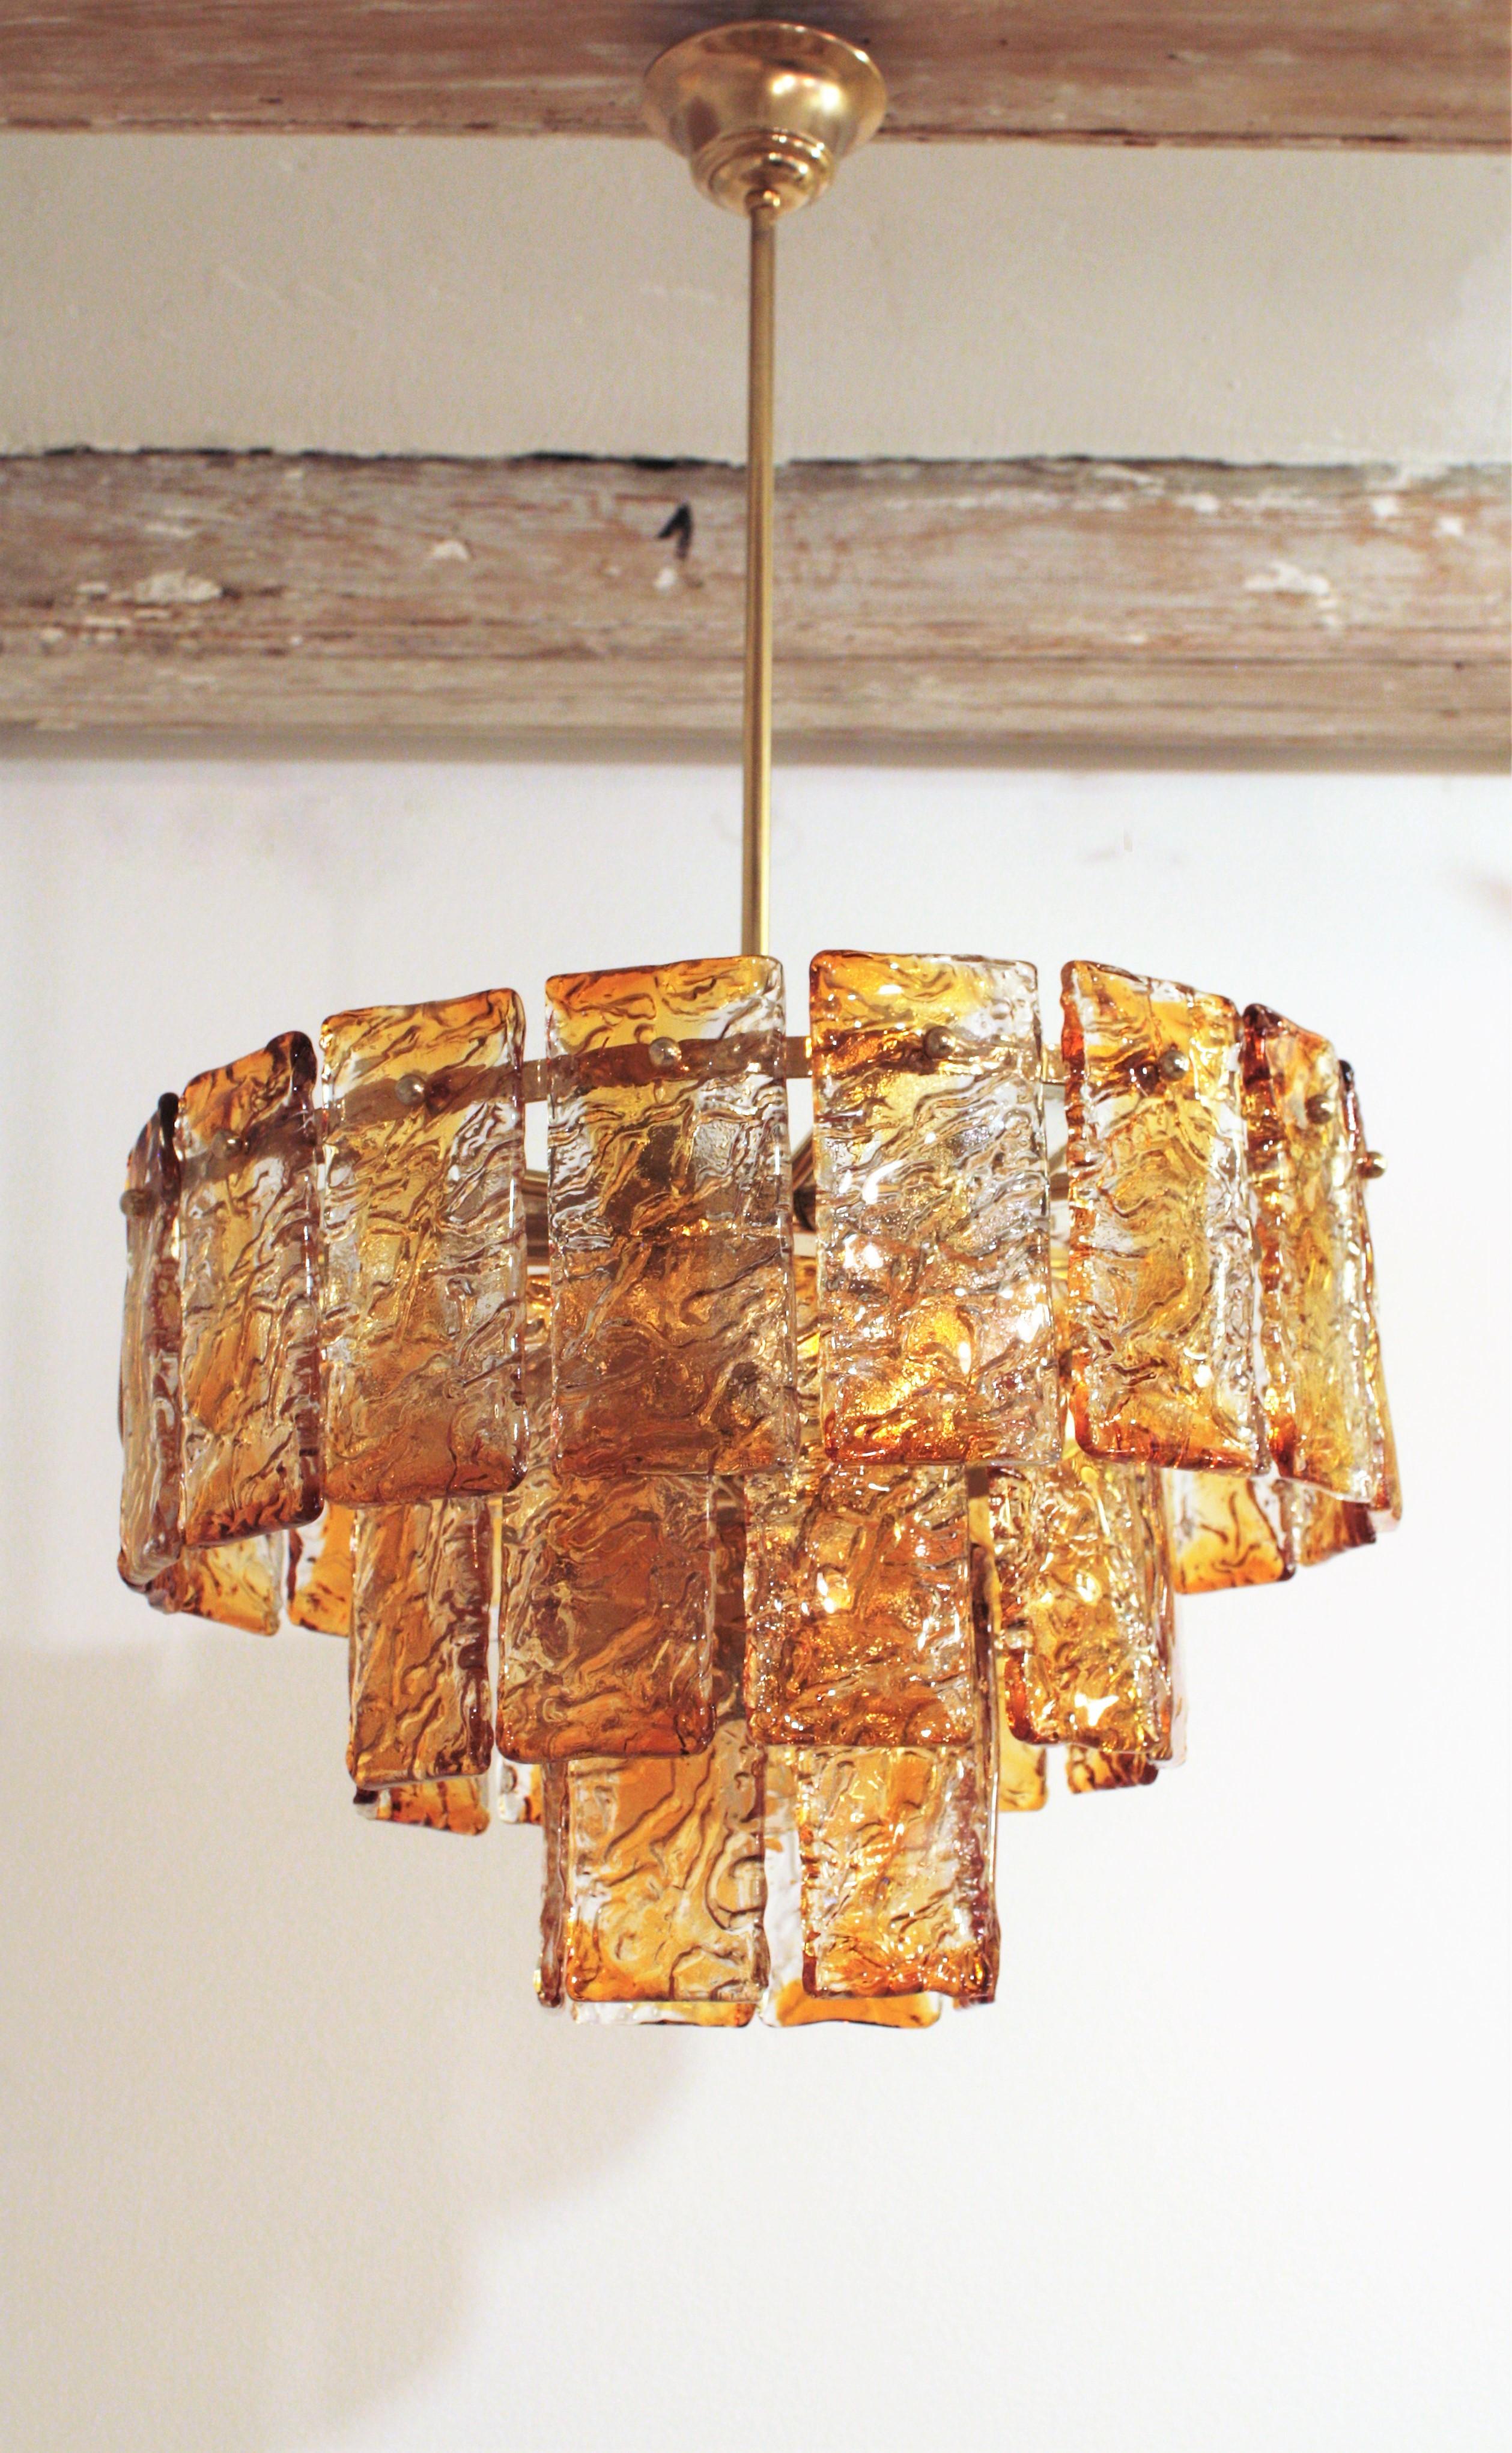 Mid-Century Modern Italian Mazzega Murano Chandelier in Amber and Clear Glass For Sale